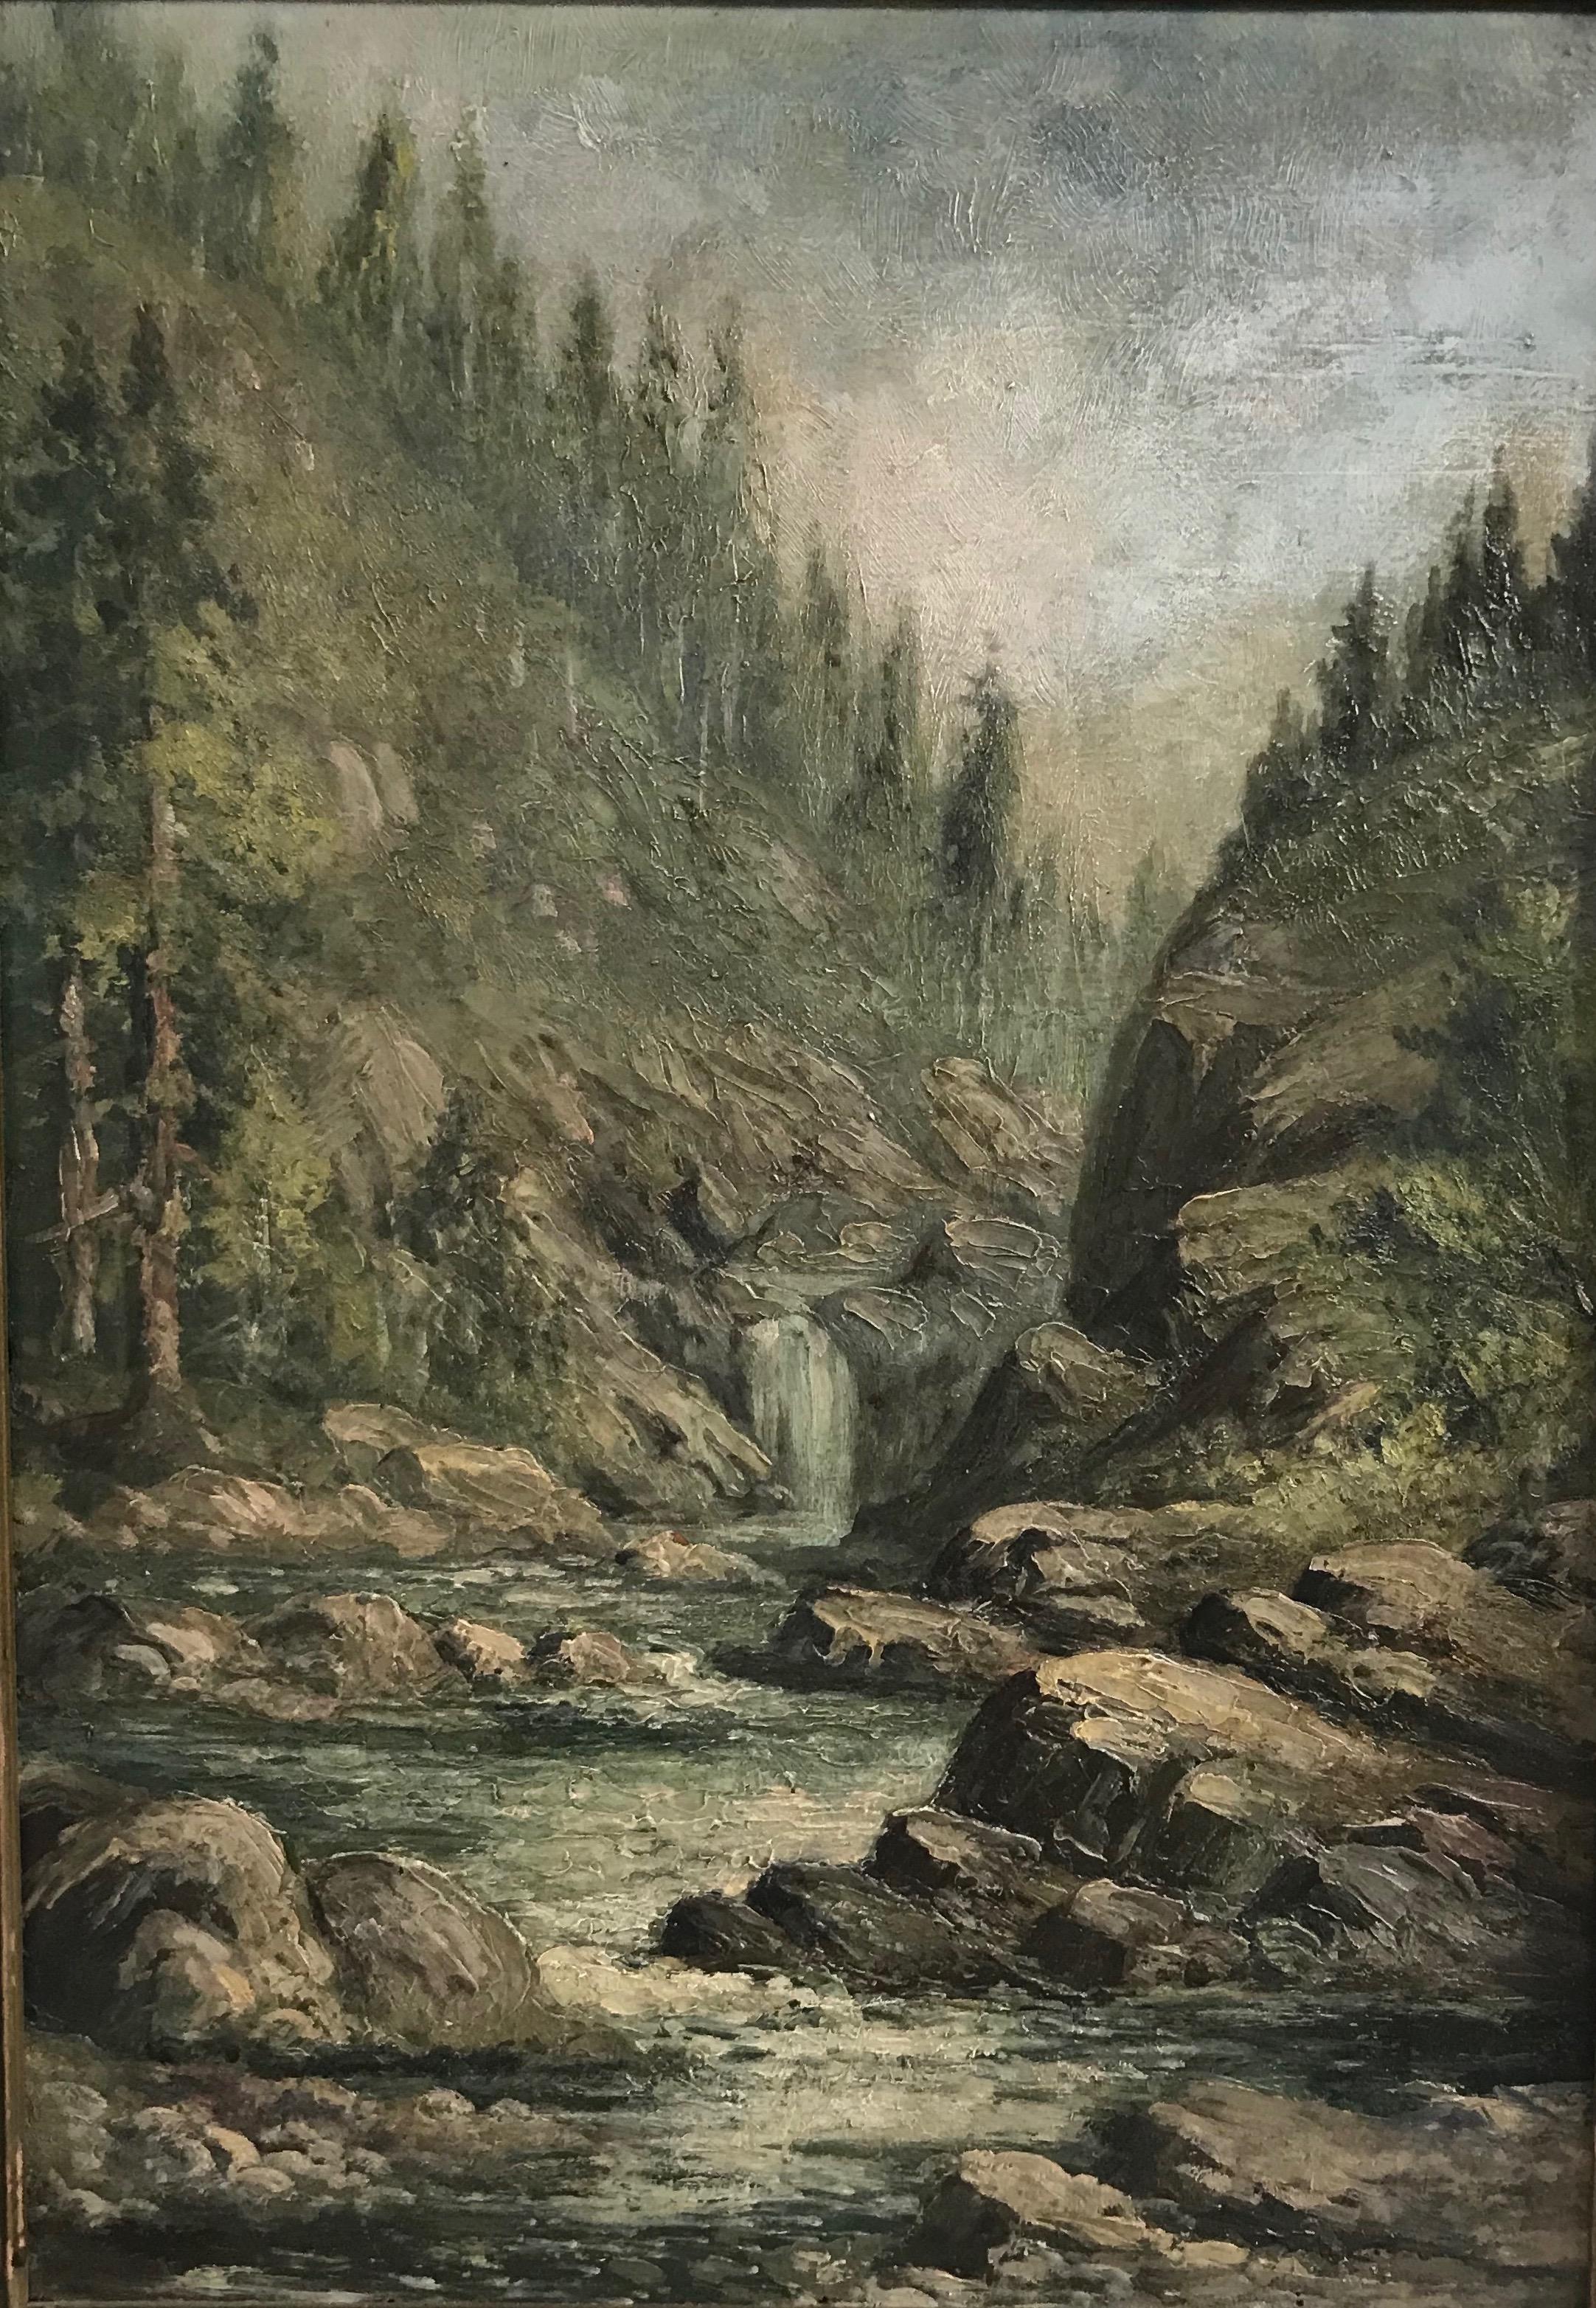 Beautifully painted river landscape scene with mountains and a waterfall, in original carved and gilt pie crust frame.
Oil on artist board, unsigned.
American, early 20th century.